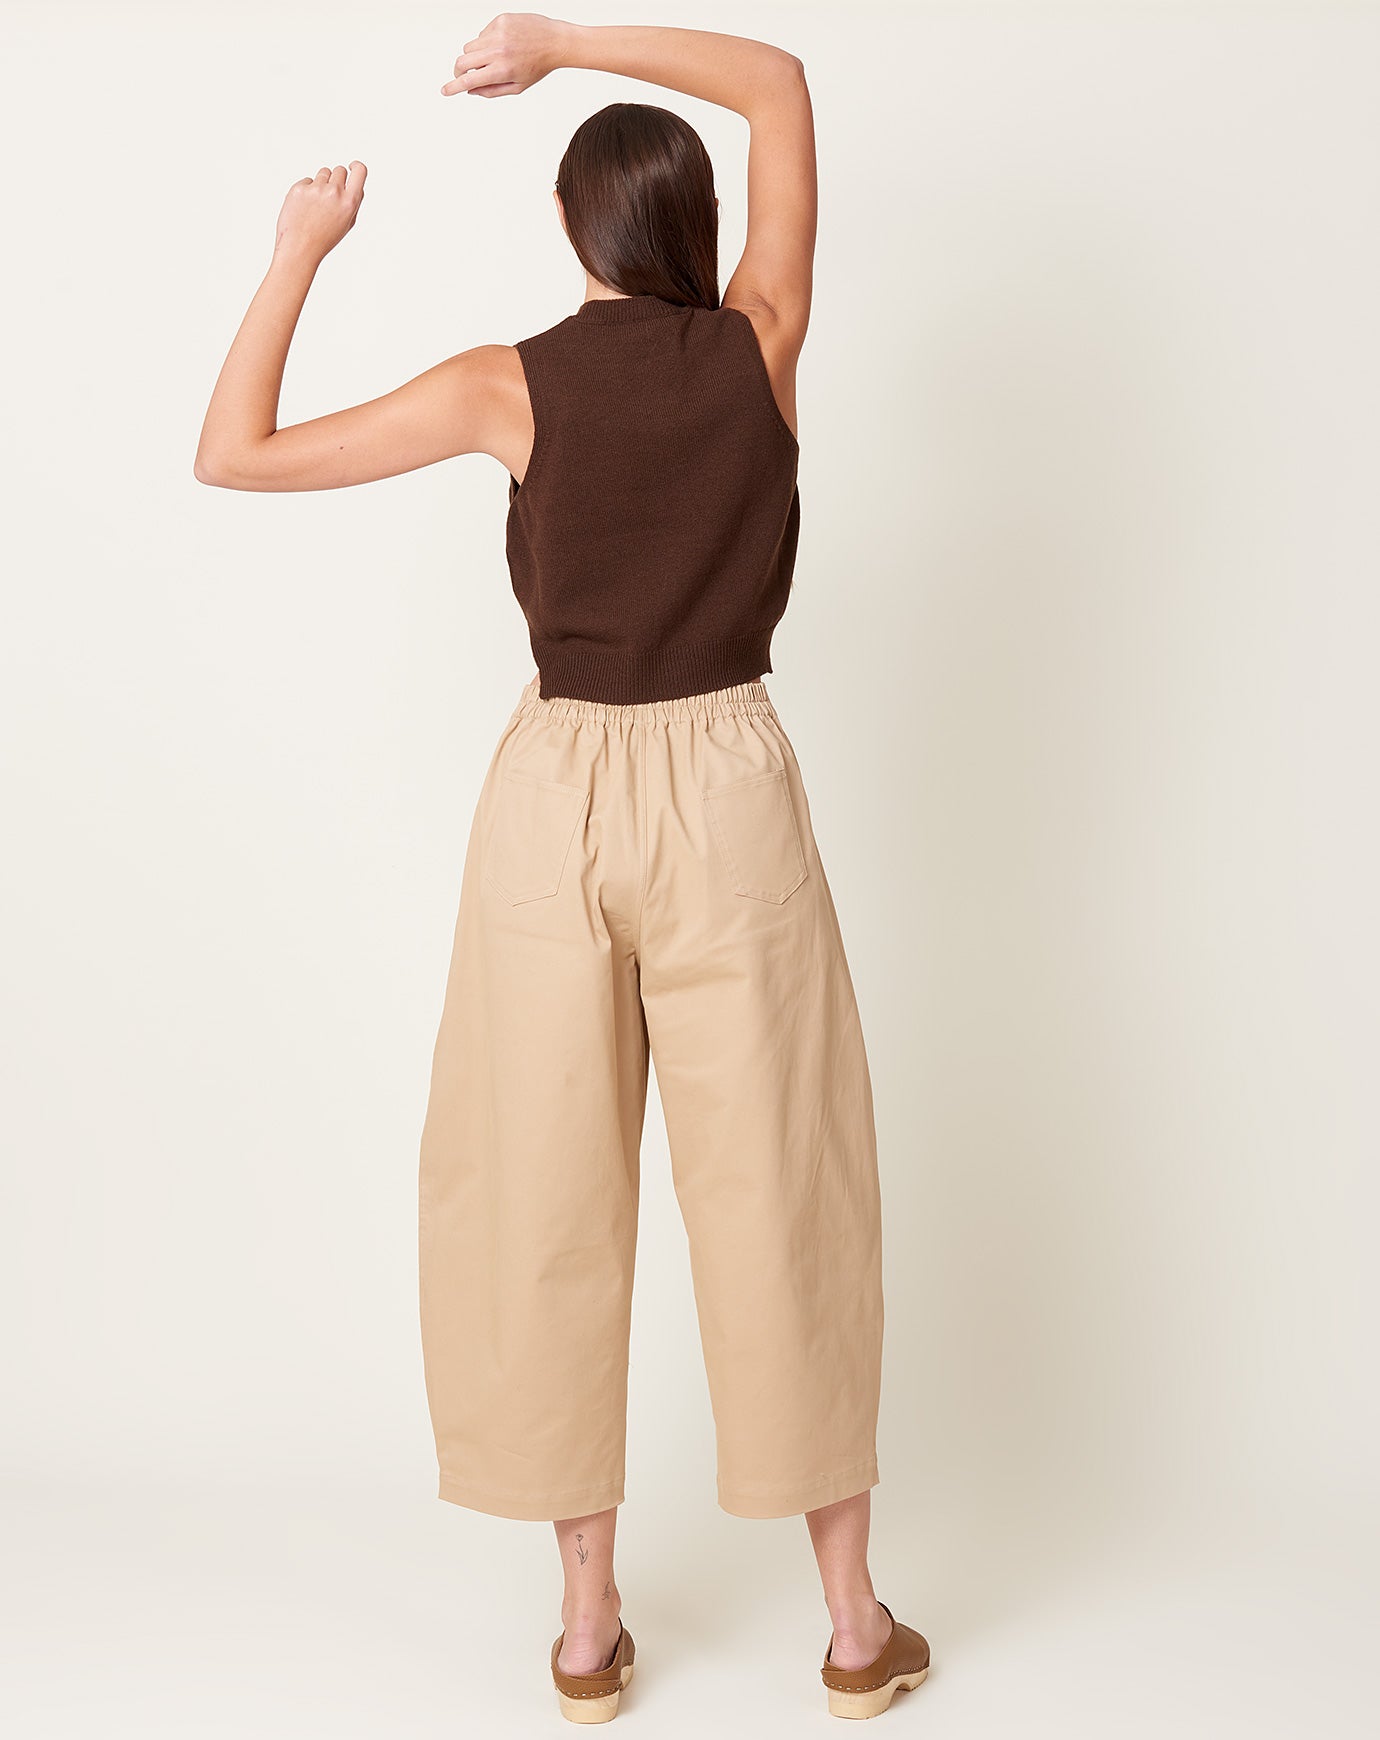 Cordera Soft Curved Pants in Toasted